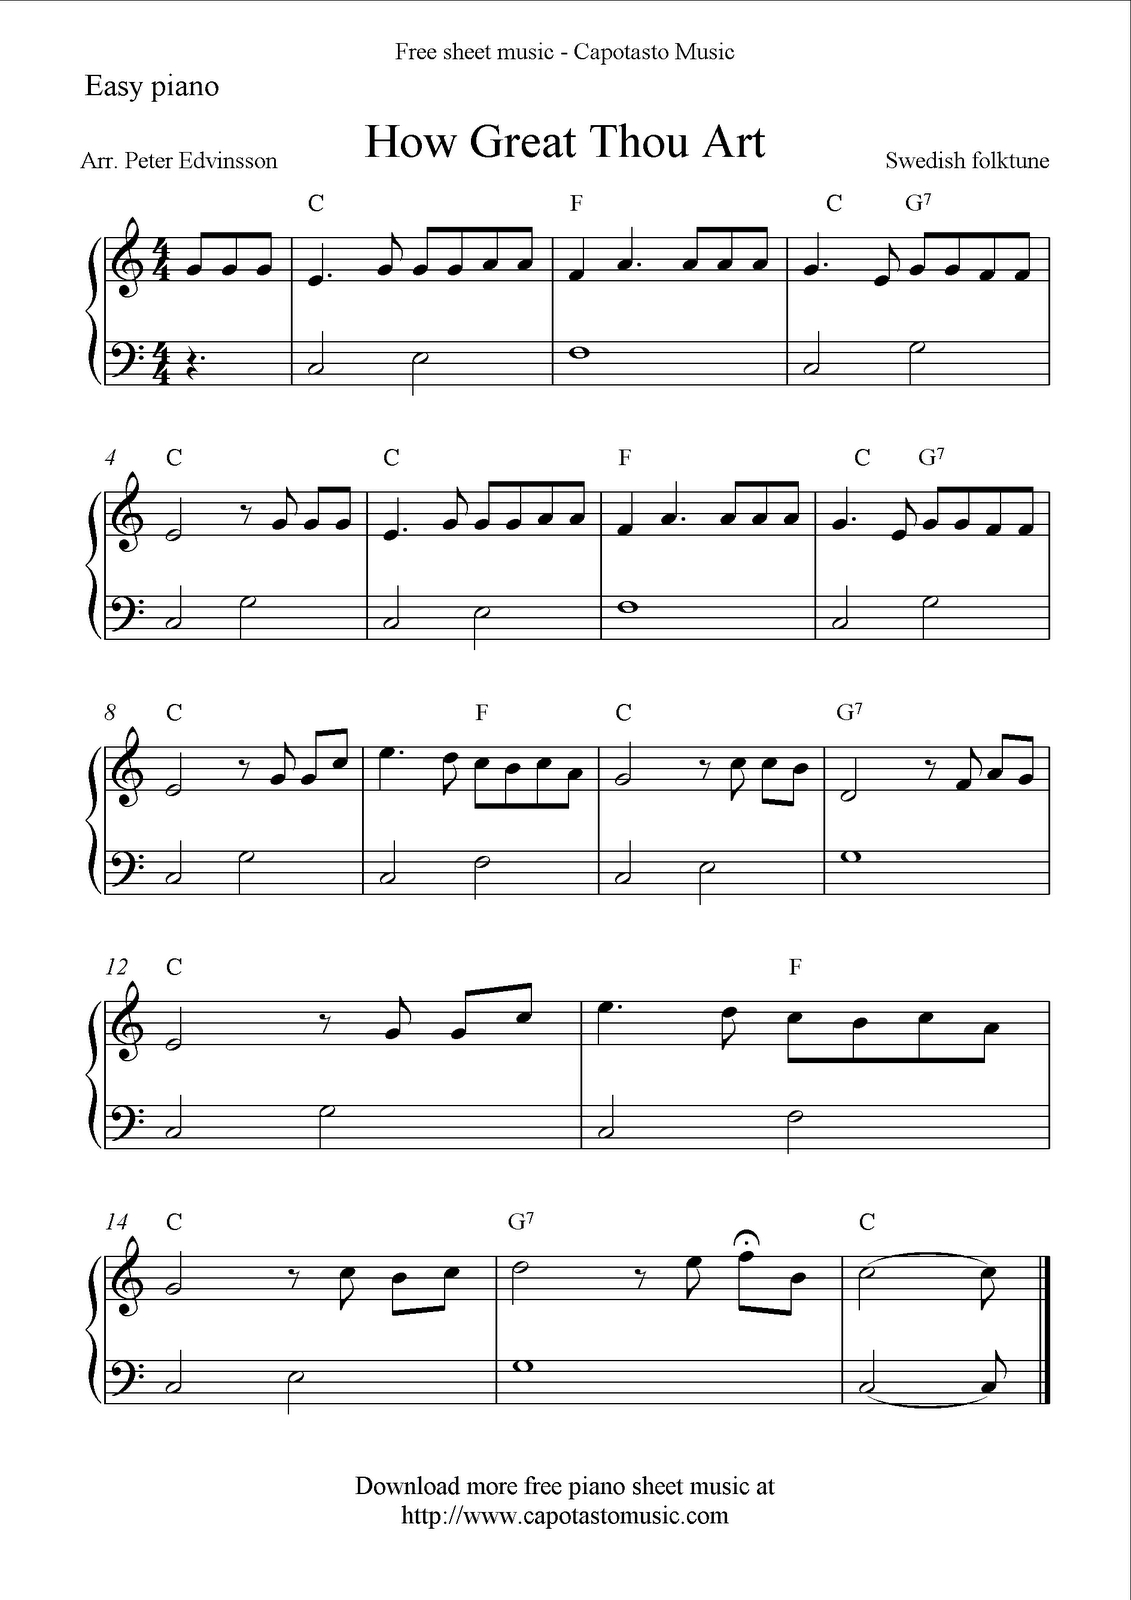 Free Sheet Music Pages &amp;amp; Guitar Lessons | Orchestra | Pinterest - Free Guitar Sheet Music For Popular Songs Printable